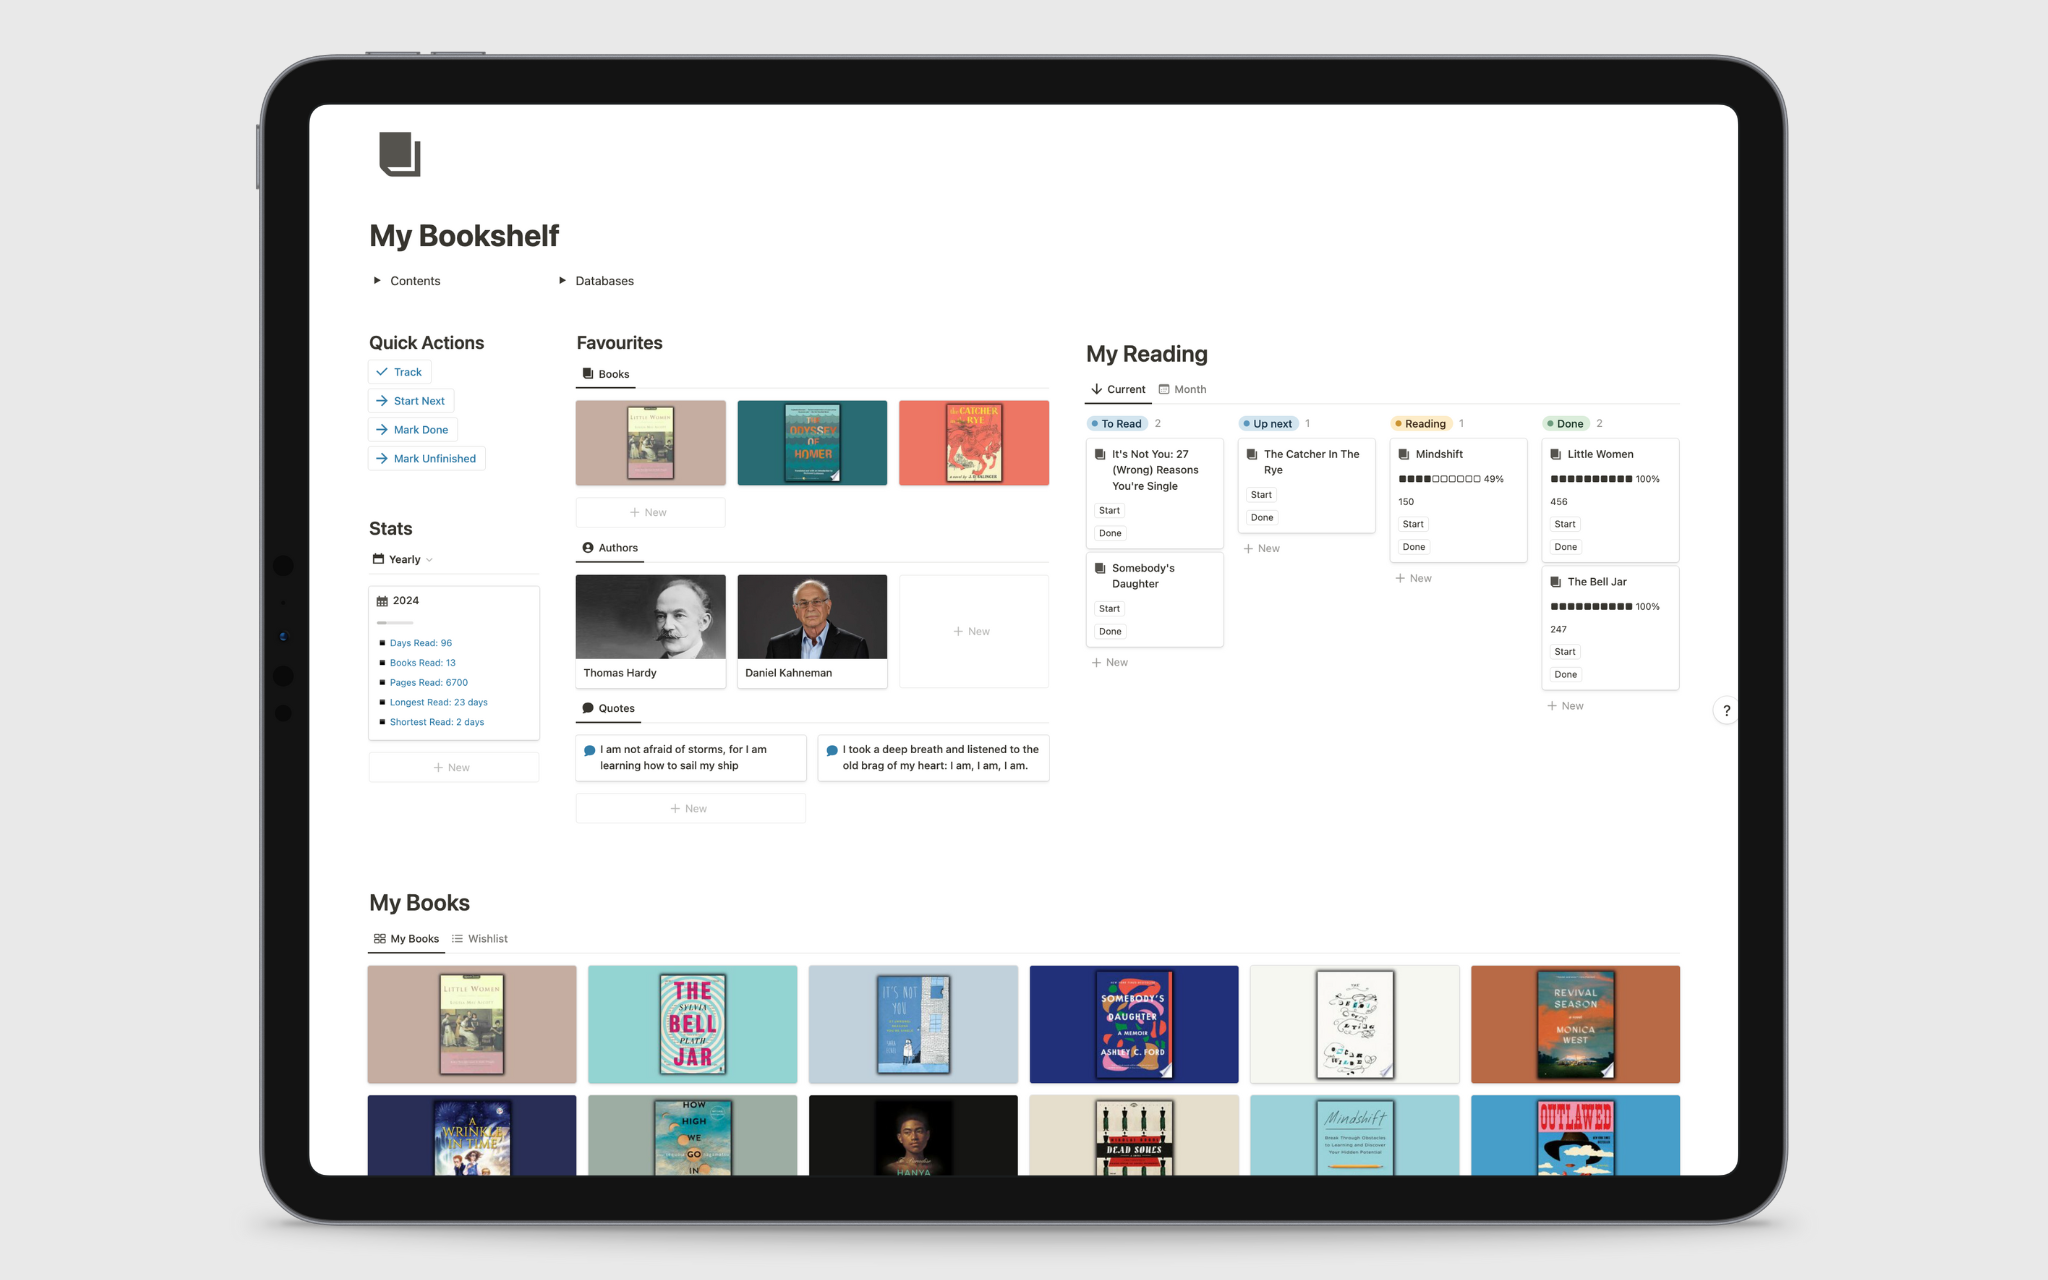 My Bookshelf will help you stay organised with your reading. It connects to Bookfill, an automation that automatically fills book details to your Notion database so you don't have to manually add them. A beautiful book cover image is also generated and added to your pages.